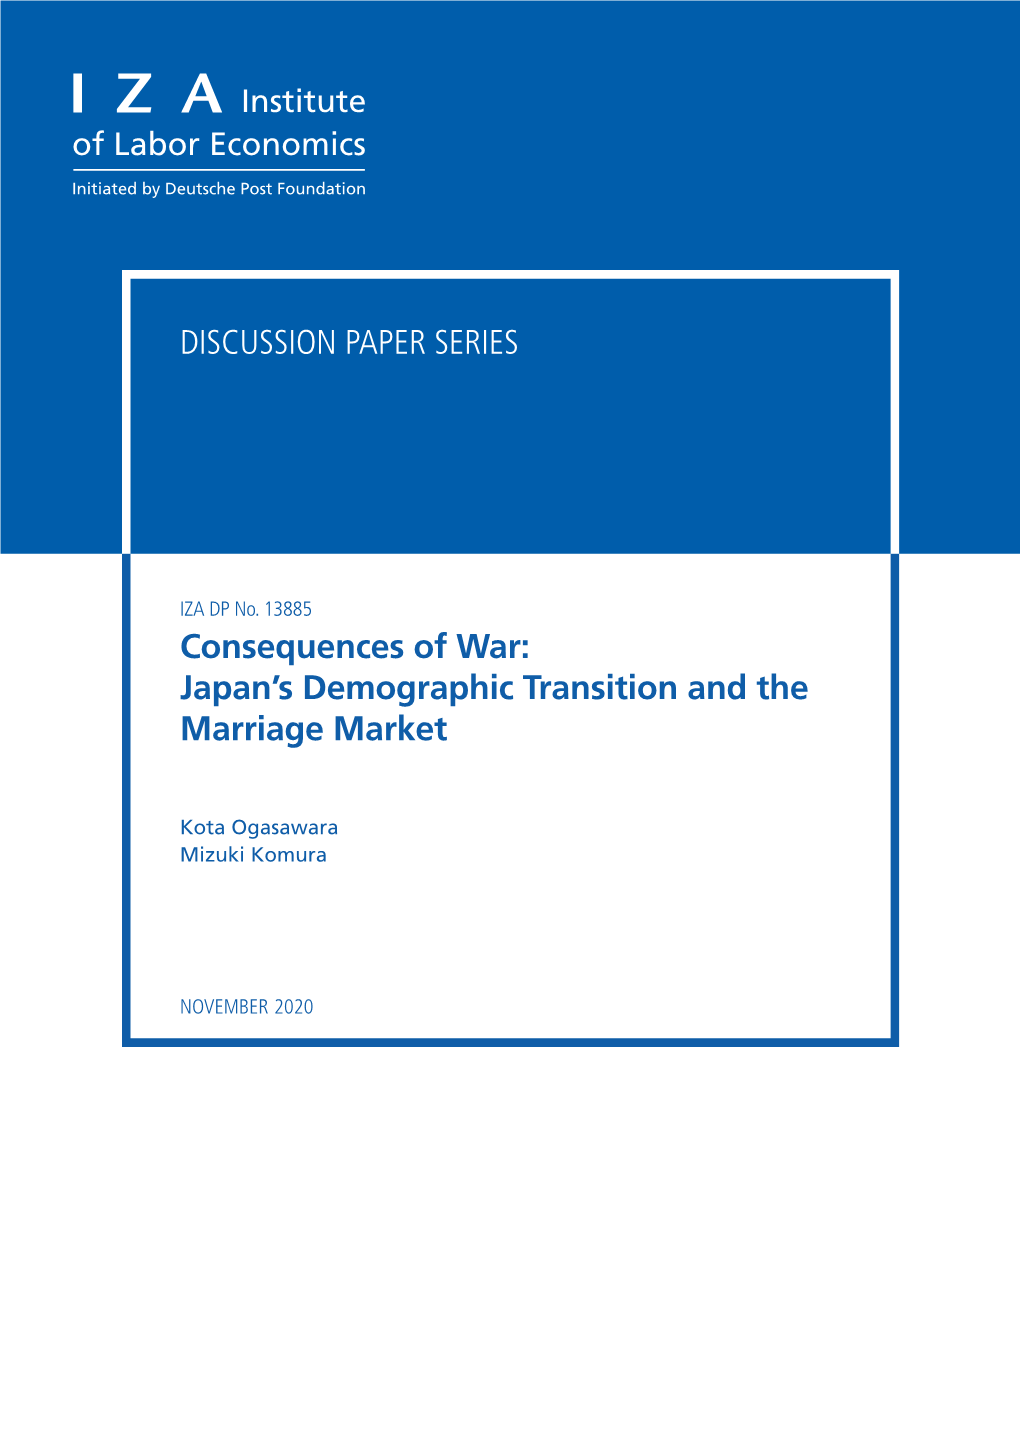 Consequences of War: Japan's Demographic Transition and The